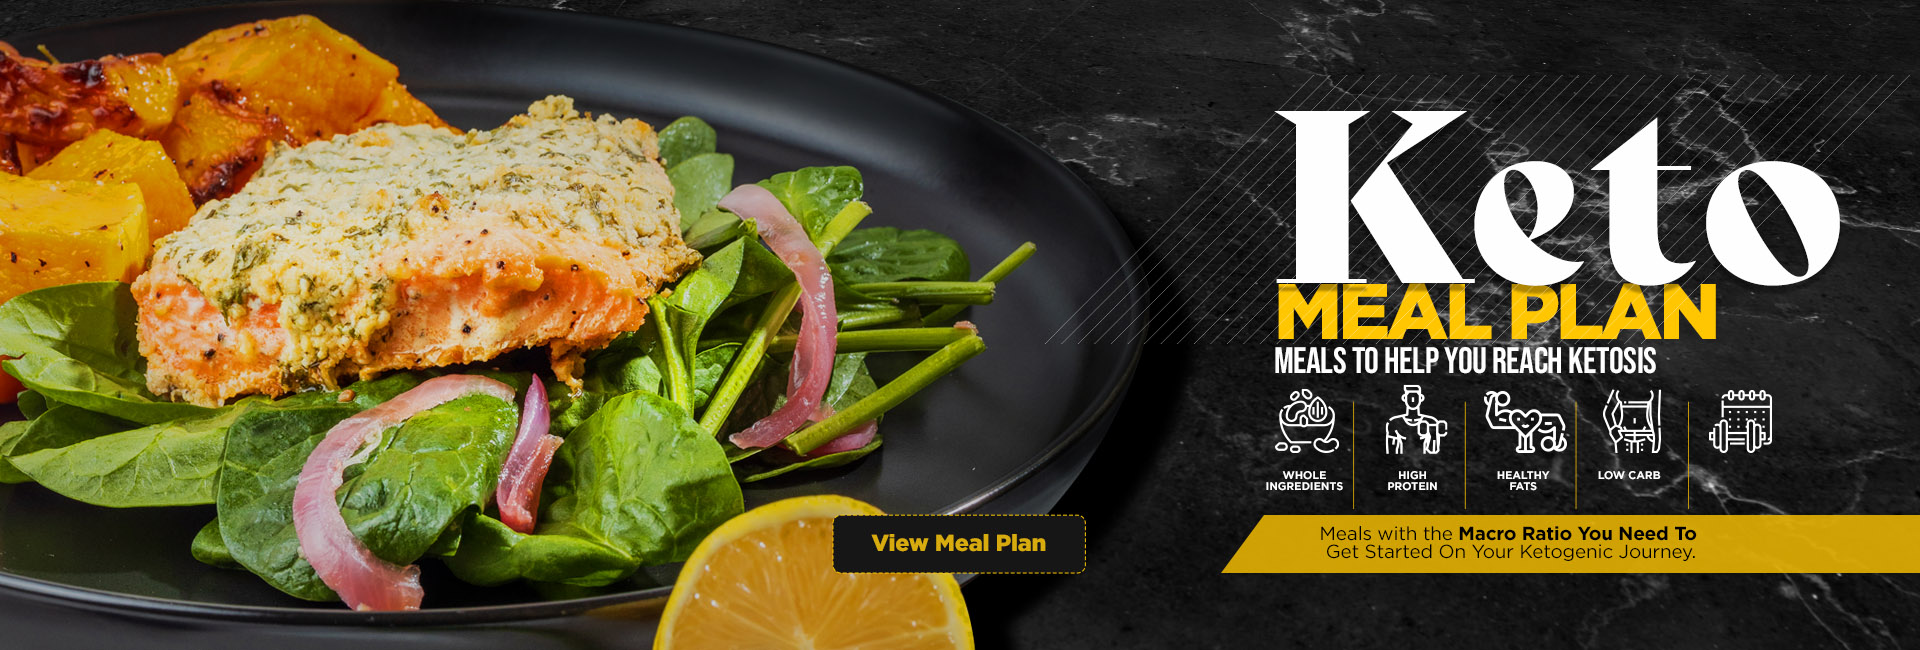 Keto Meal Plan - Meals To Help You Reach Ketosis.